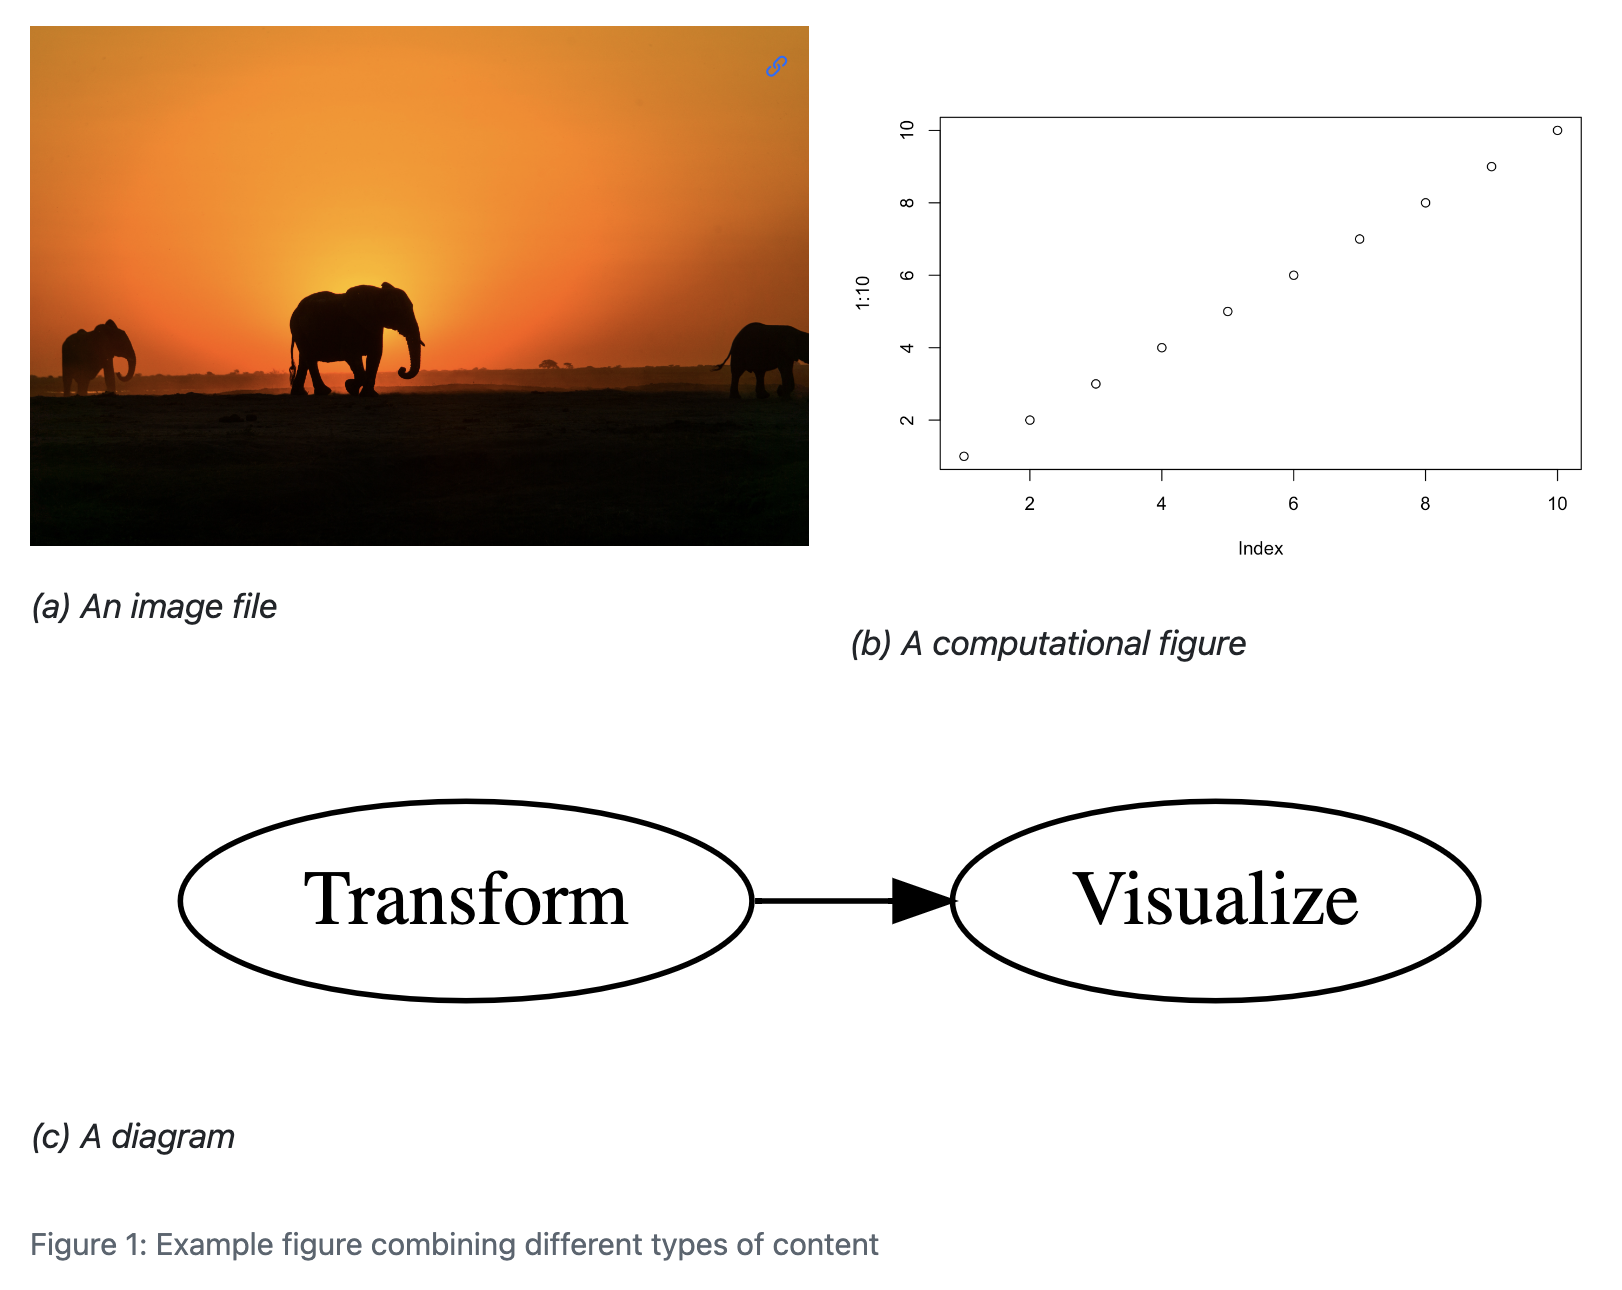 A screenshot of a figure layout with two rows. The top row has two columns: on the left an image of an elephant silhouetted against a sunset with the caption (a) An image file; on the right a scatterplot with the caption (b) A computational figure. In the bottom row is a flow chart with a node Transform linked to the node Visualize with the caption (c) A diagram. Below the layout is the caption: Figure 1: Example figure combining different types of content.